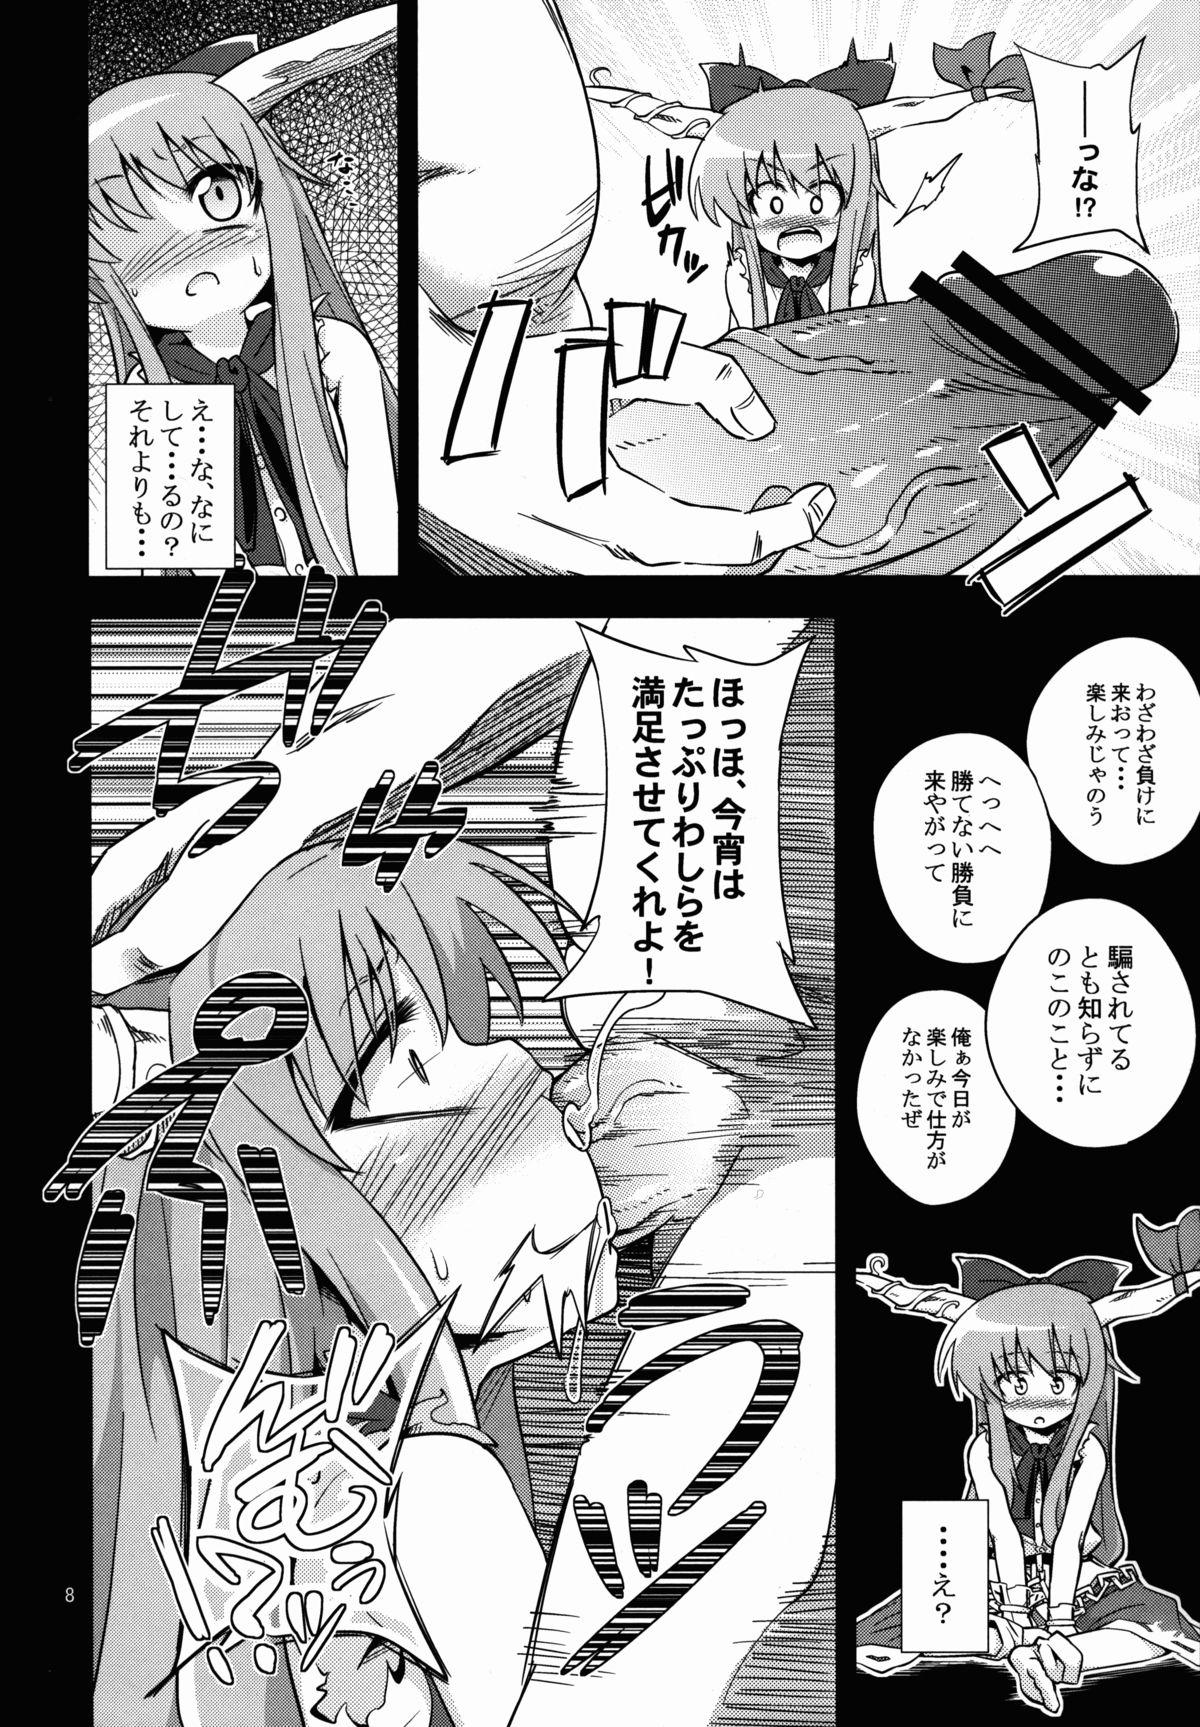 Pussy Lick 鬼犯嘘犯喜 - Touhou project Oralsex - Page 8